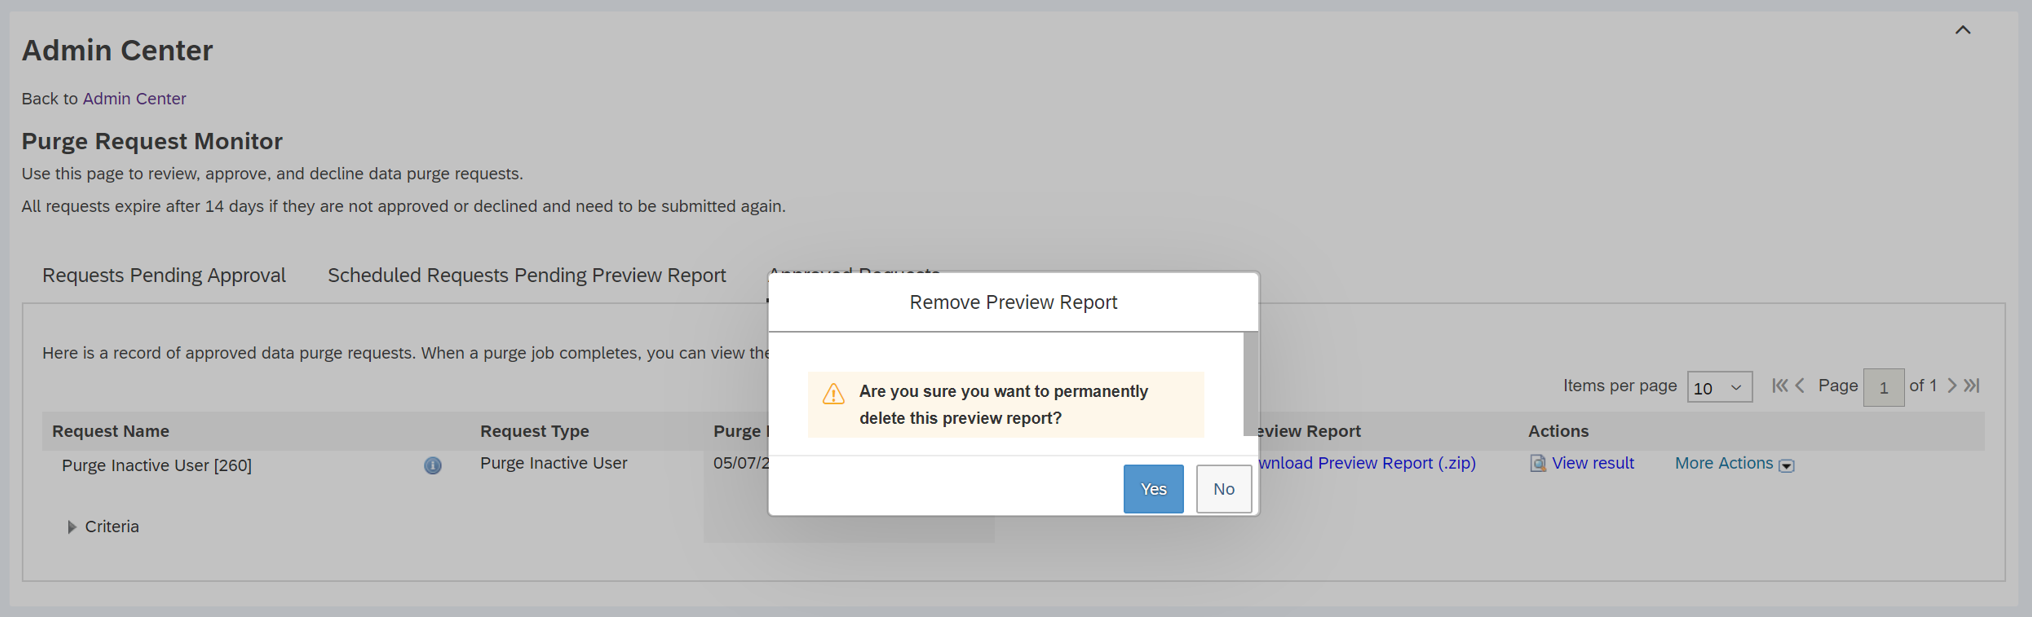 Remove Preview report popup.PNG